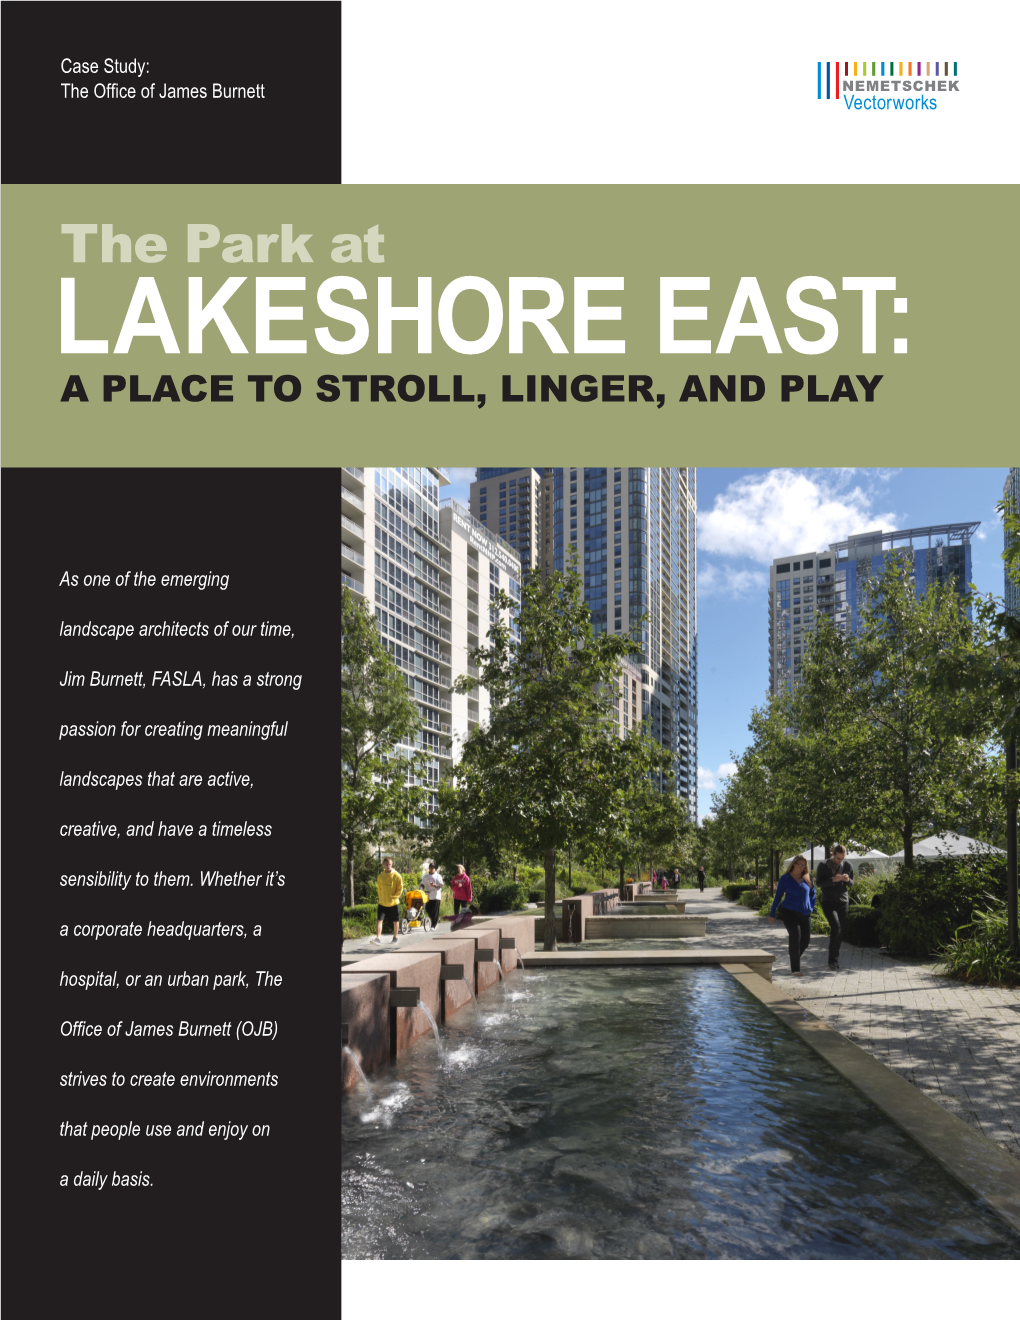 Lakeshore East: a Place to Stroll, Linger, and Play